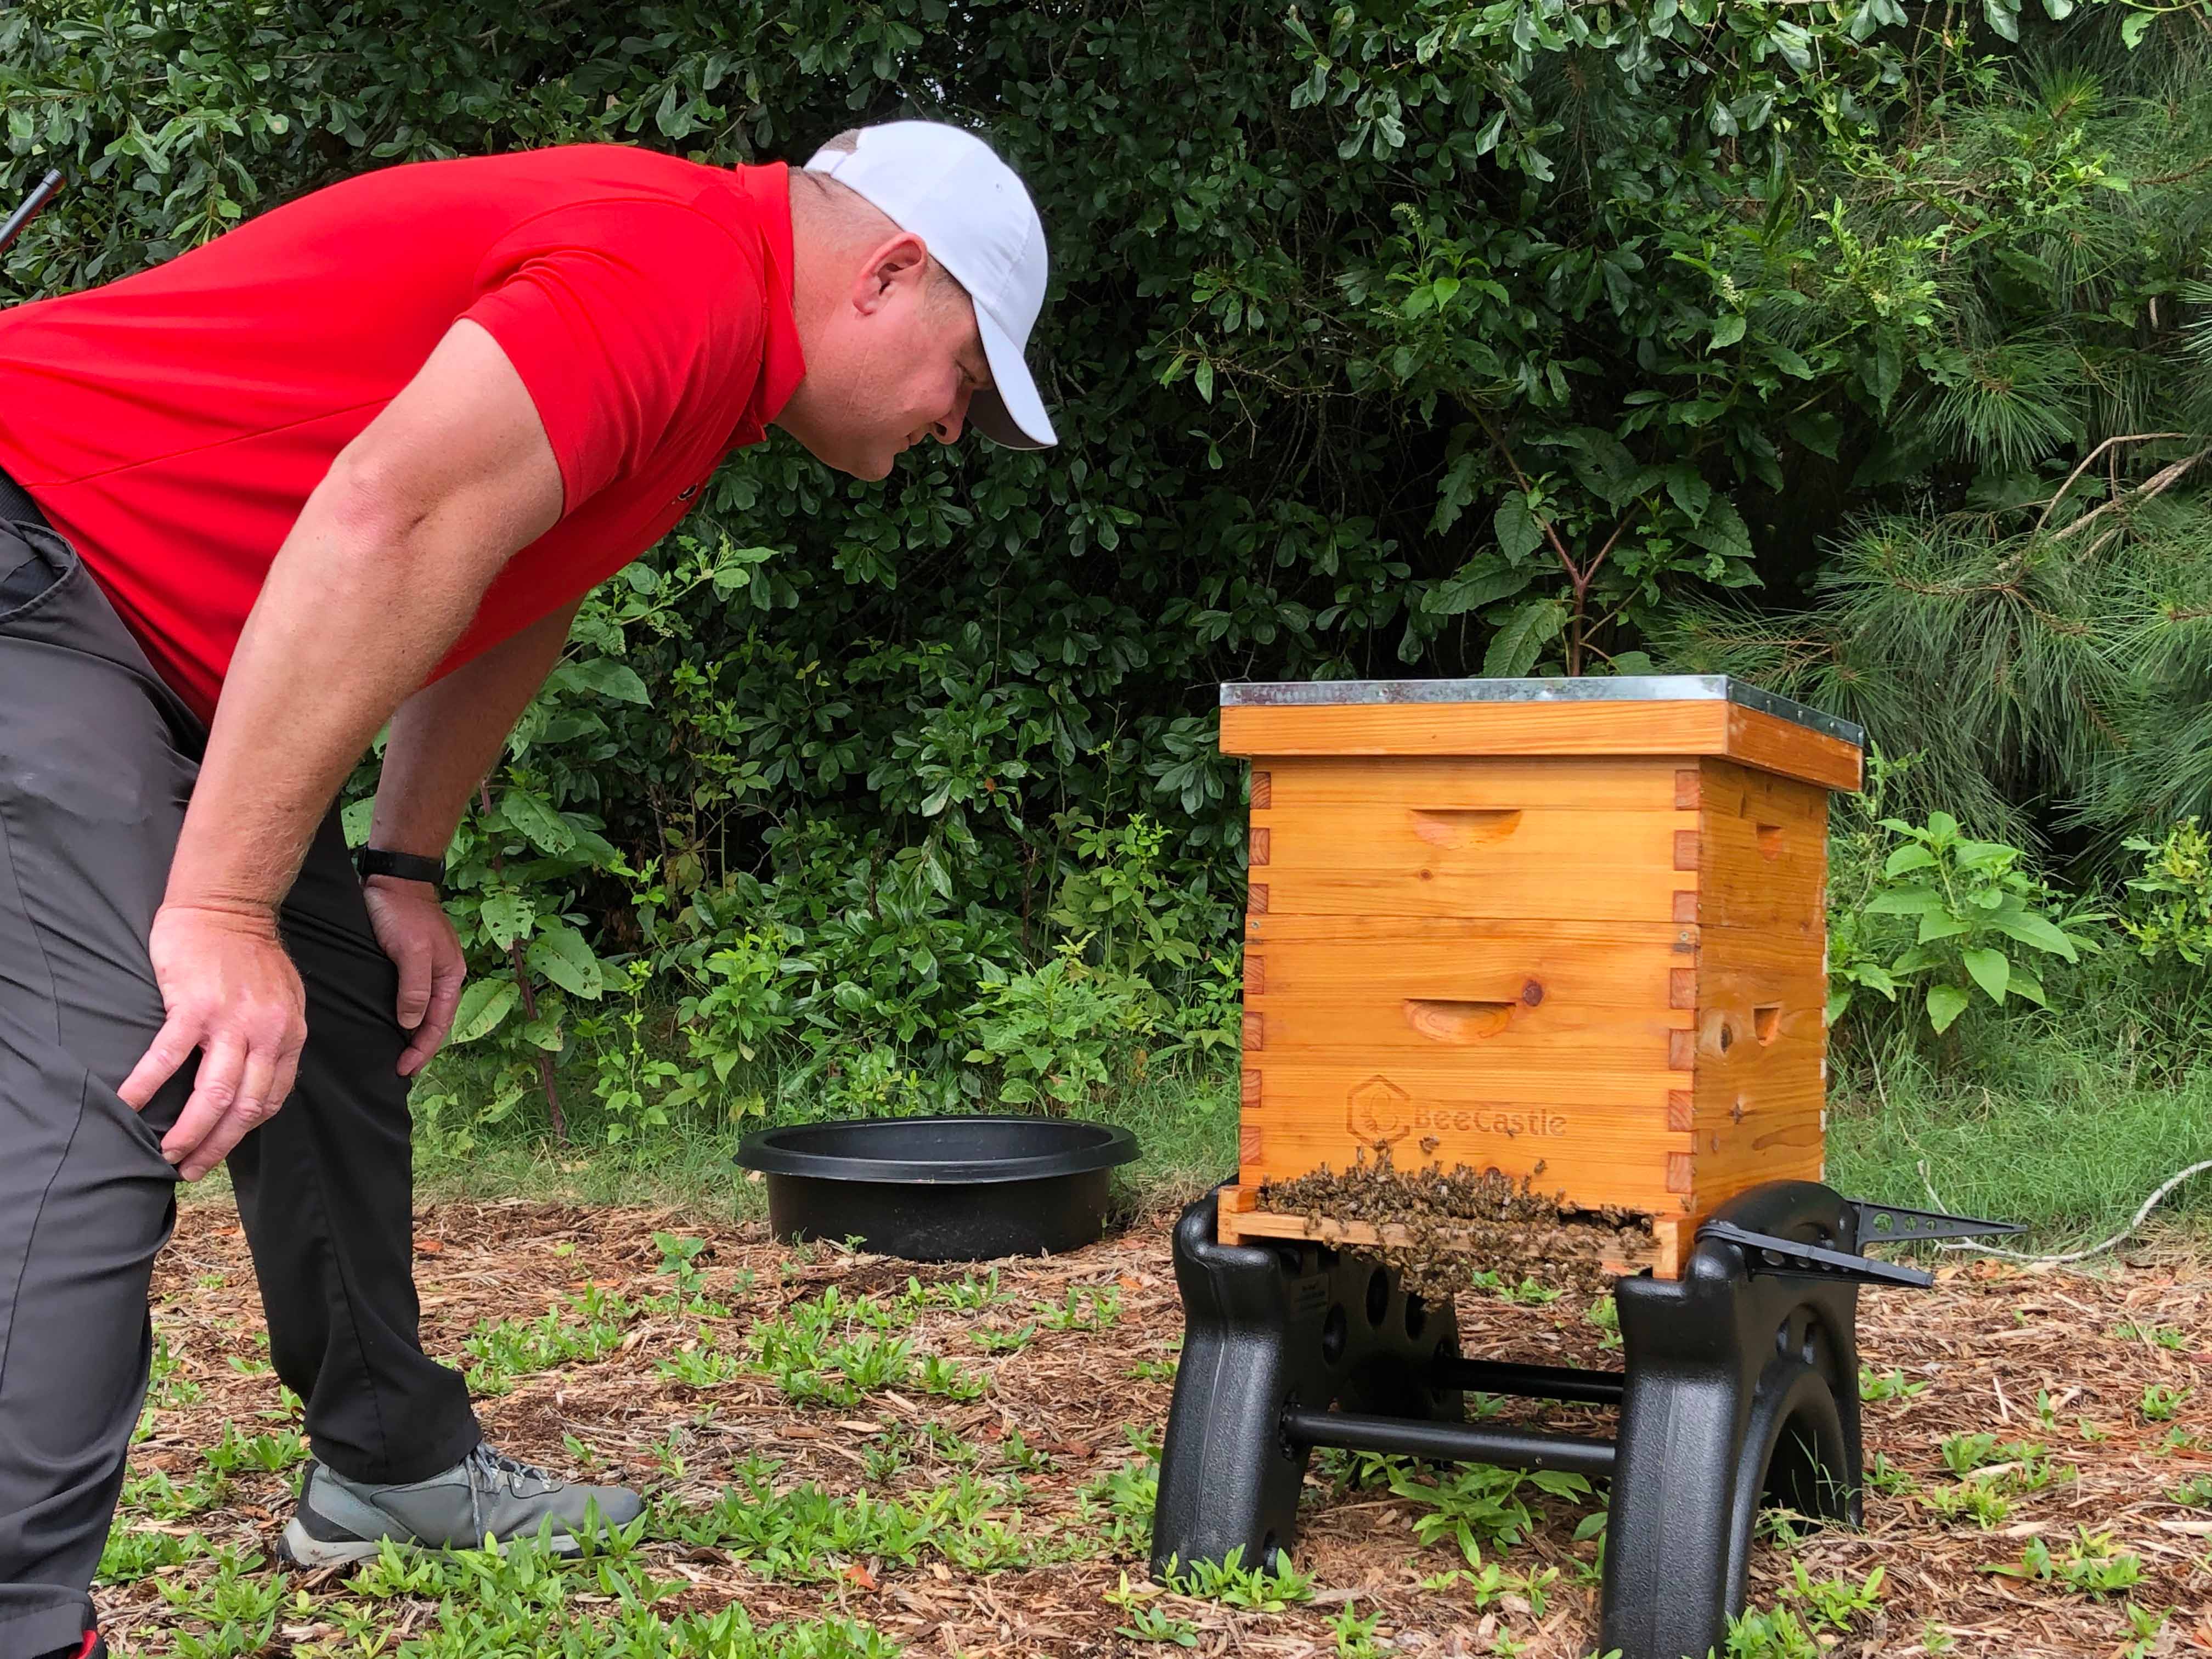 A man wearing a red shirt a white hat bends over to view a bee hive box with bees crawling on the outside.